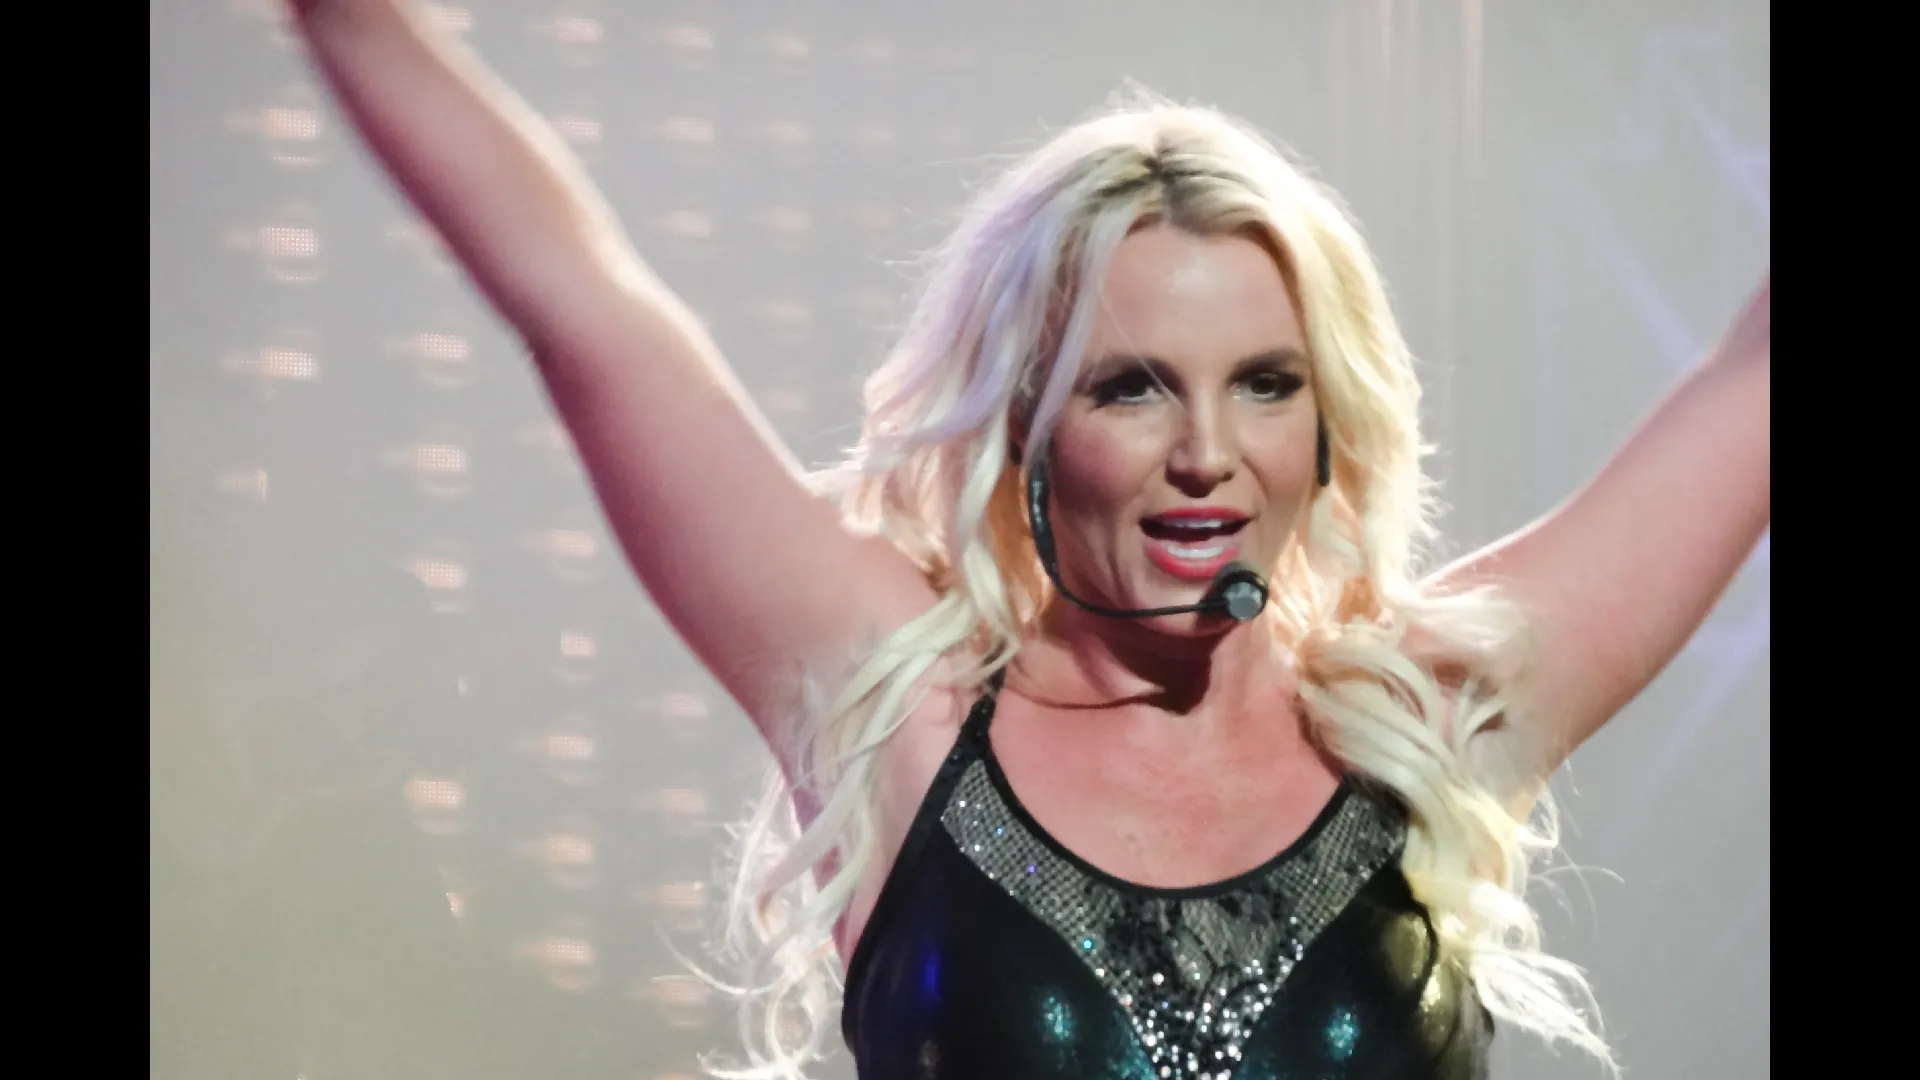 Britney Spears breaks free: Sam's inability to handle her independence